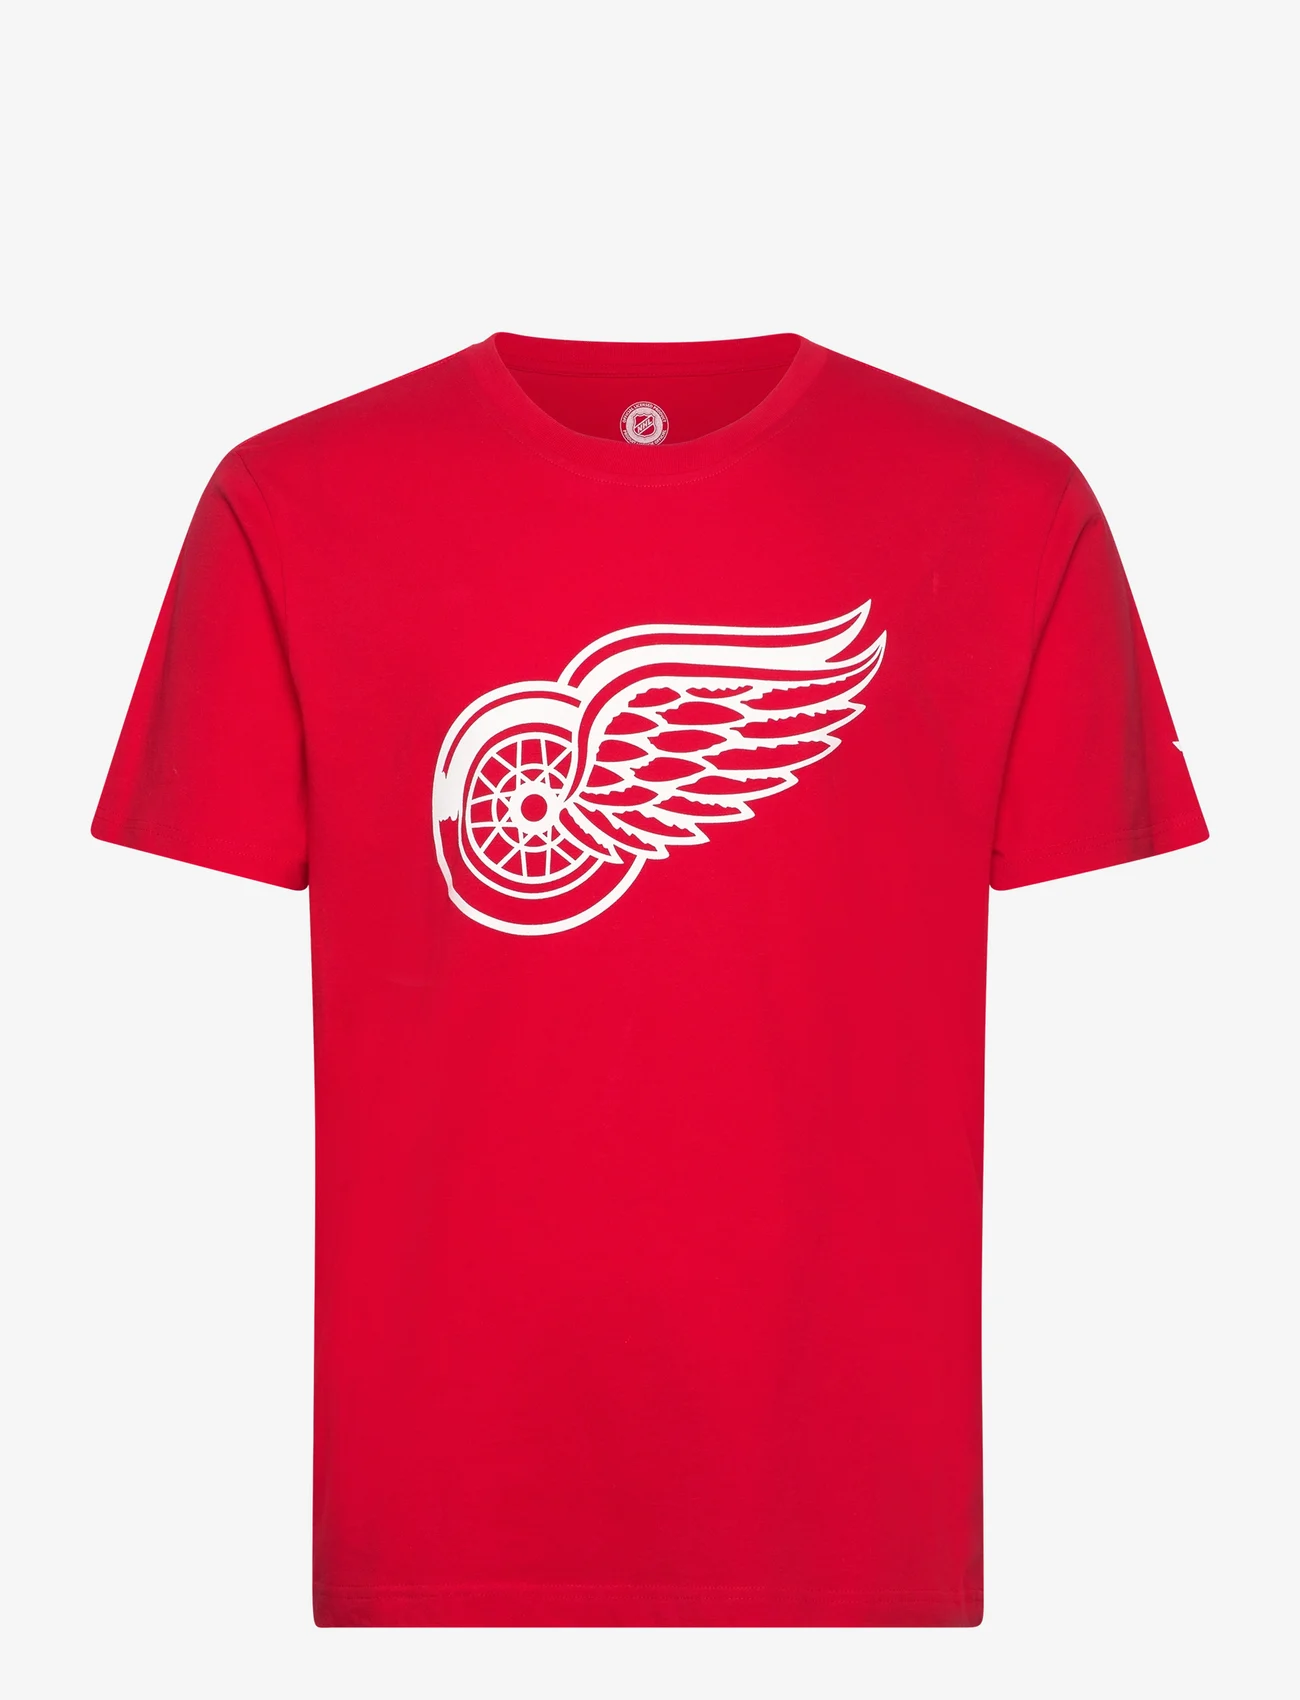 Fanatics - Detroit Red Wings Primary Logo Graphic T-Shirt - lowest prices - athletic red - 0